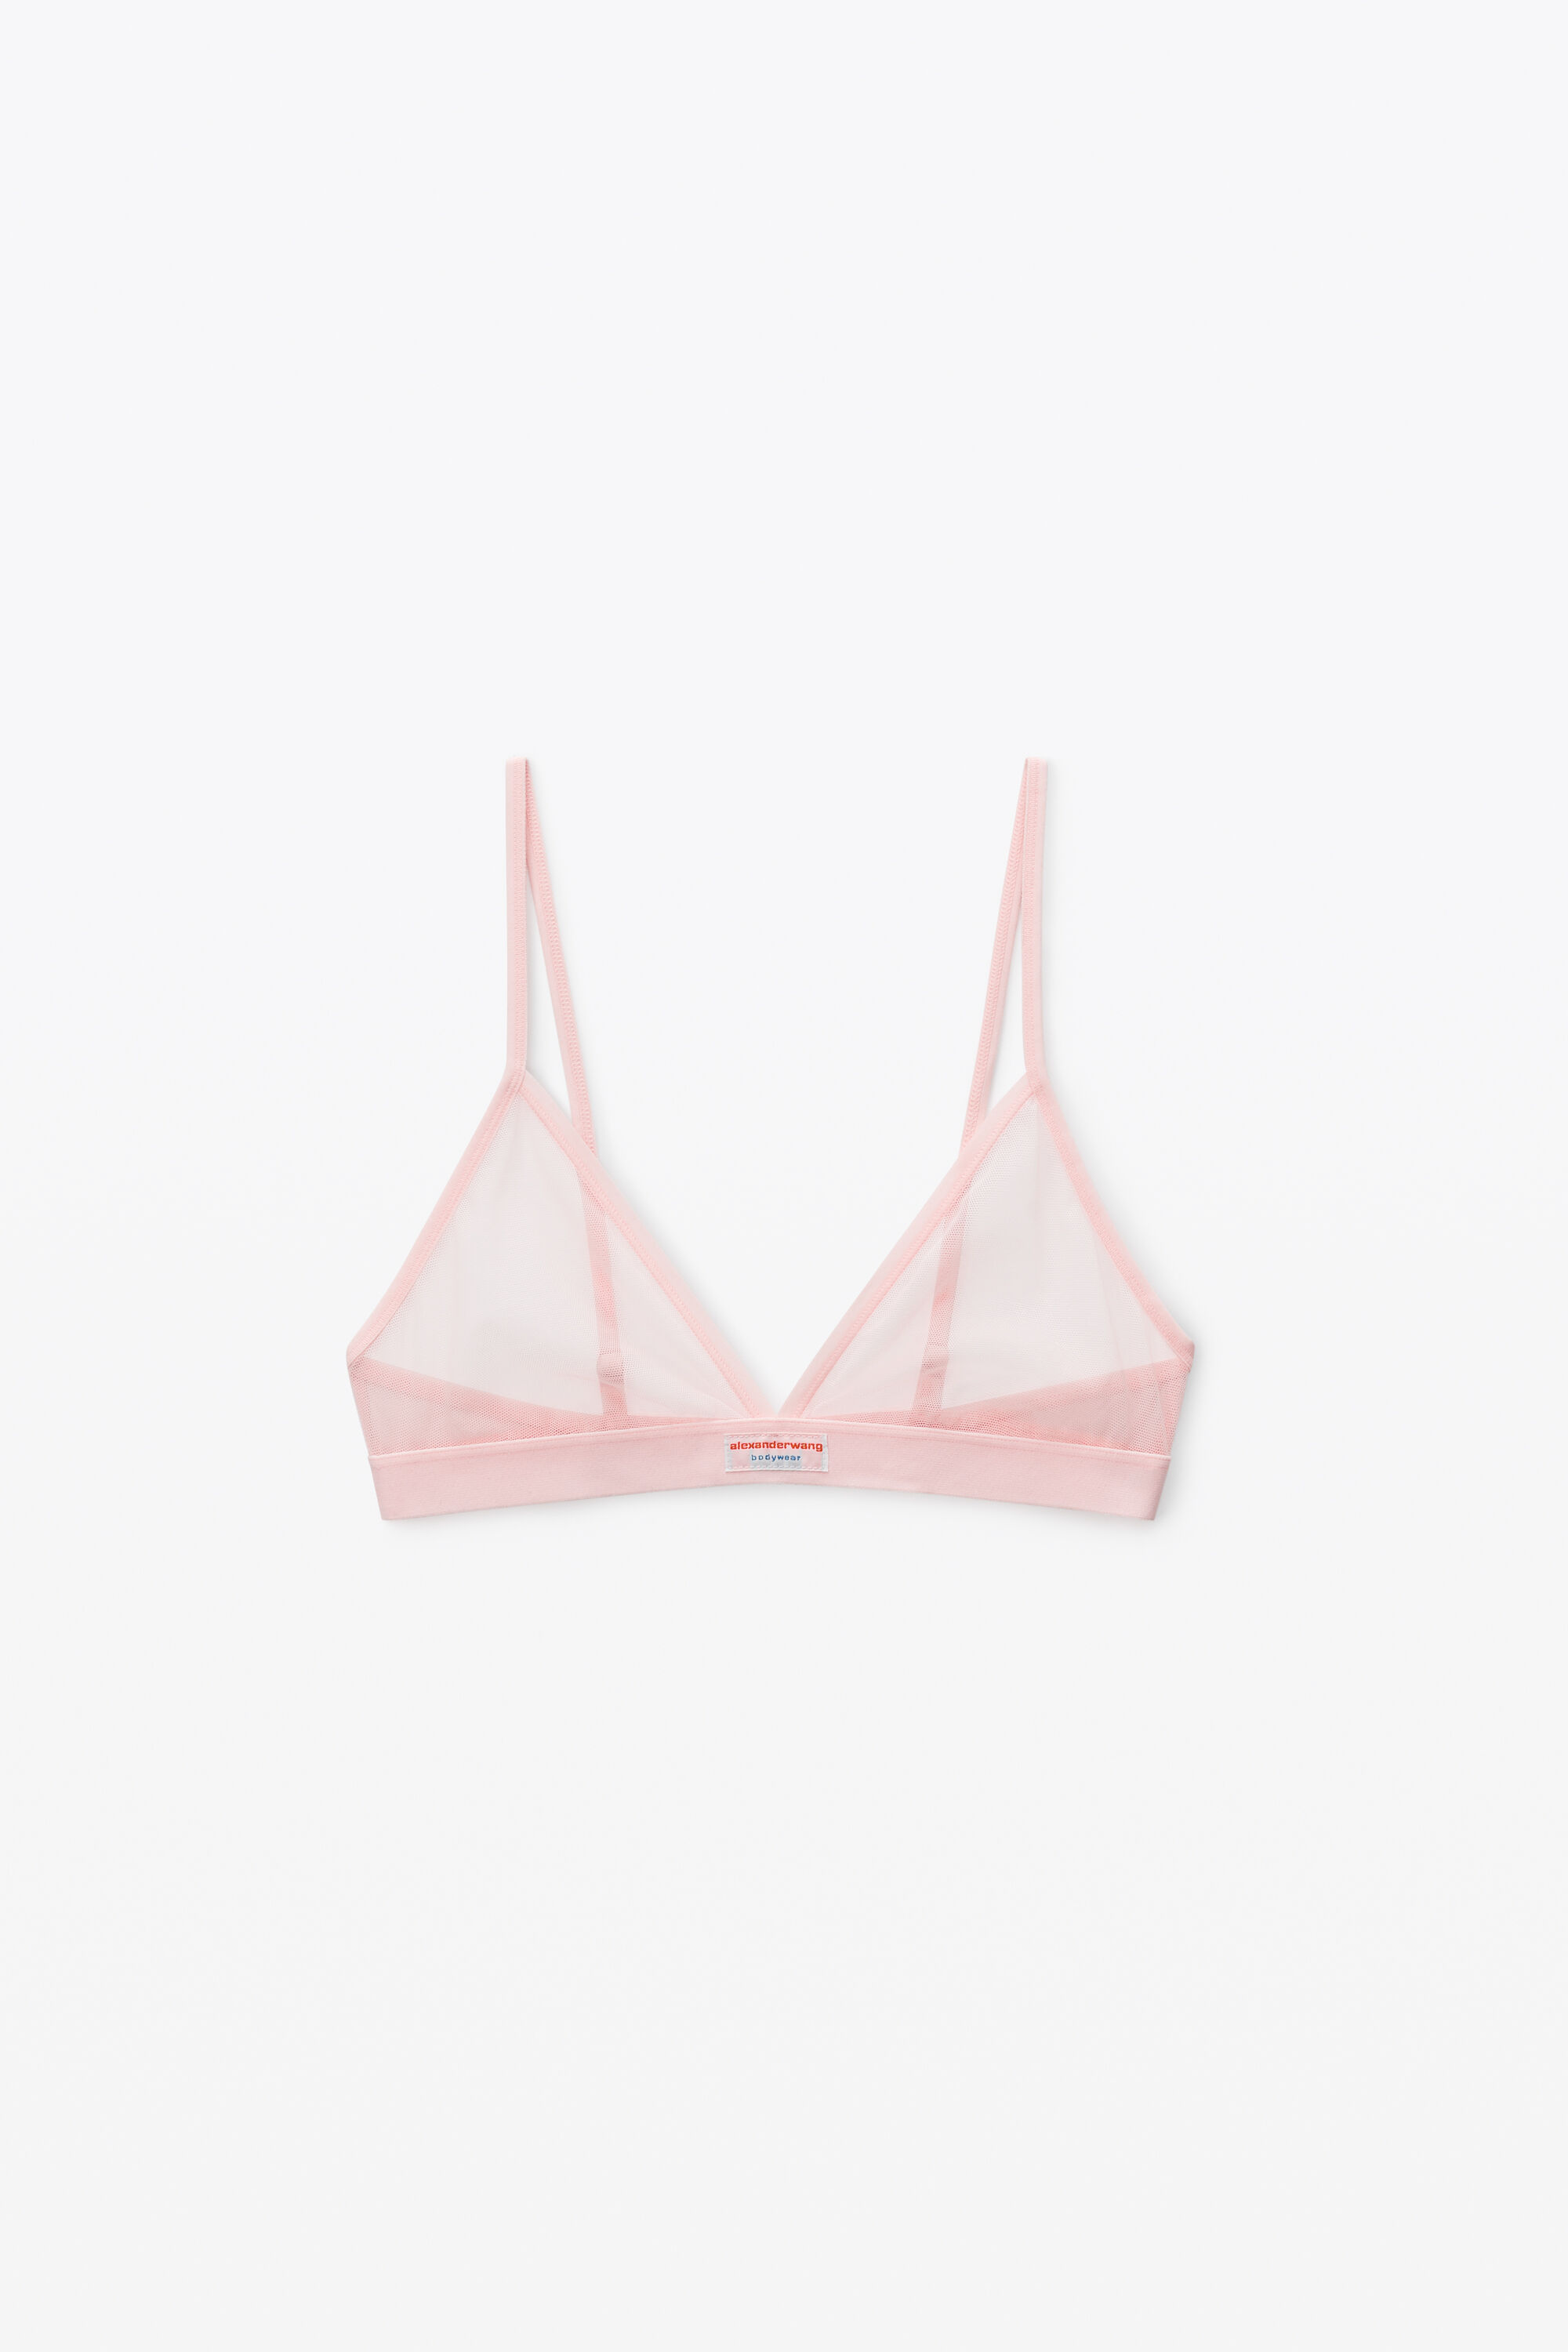 Women's Light Support Rib Triangle Bra - All In Motion™ Pink 4x